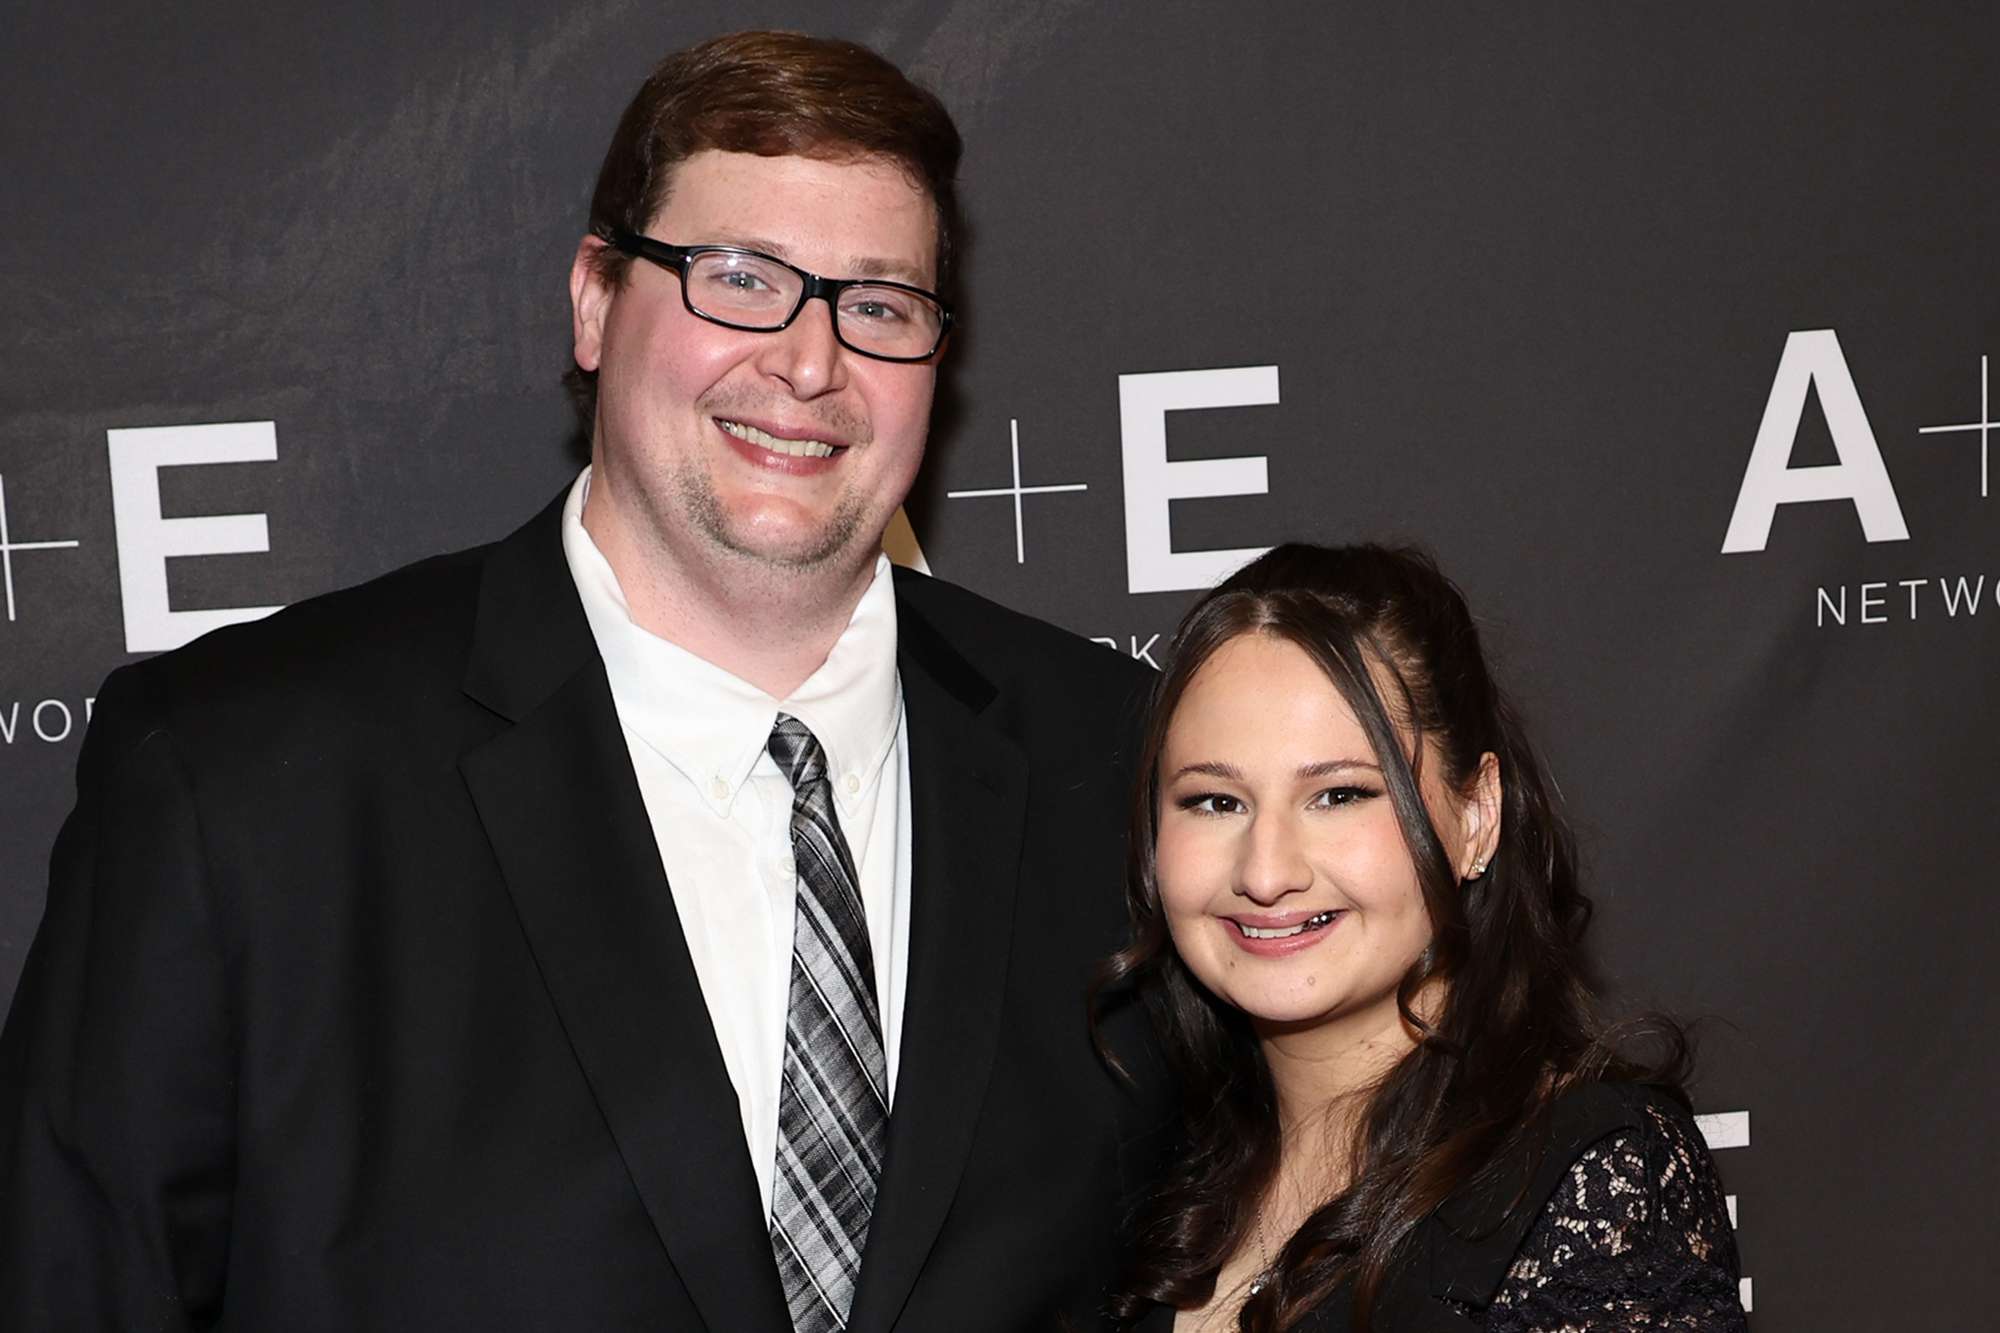 Gypsy-Rose Blanchard's Ex Says He Misses Her on Their 3-Year Anniversary, Calls Her New Boyfriend Ken a 'Punk'